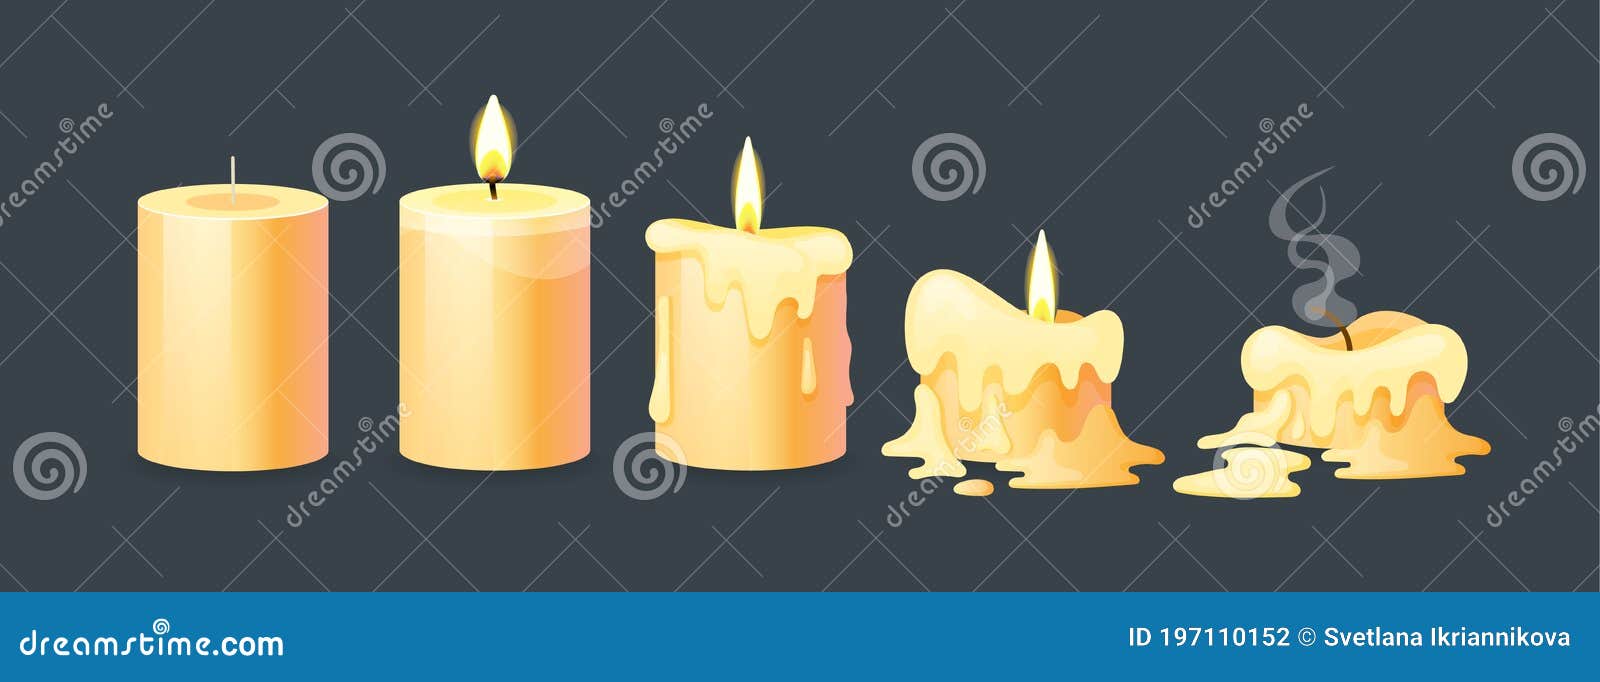 Burning candle with melting wax on a small Vector Image